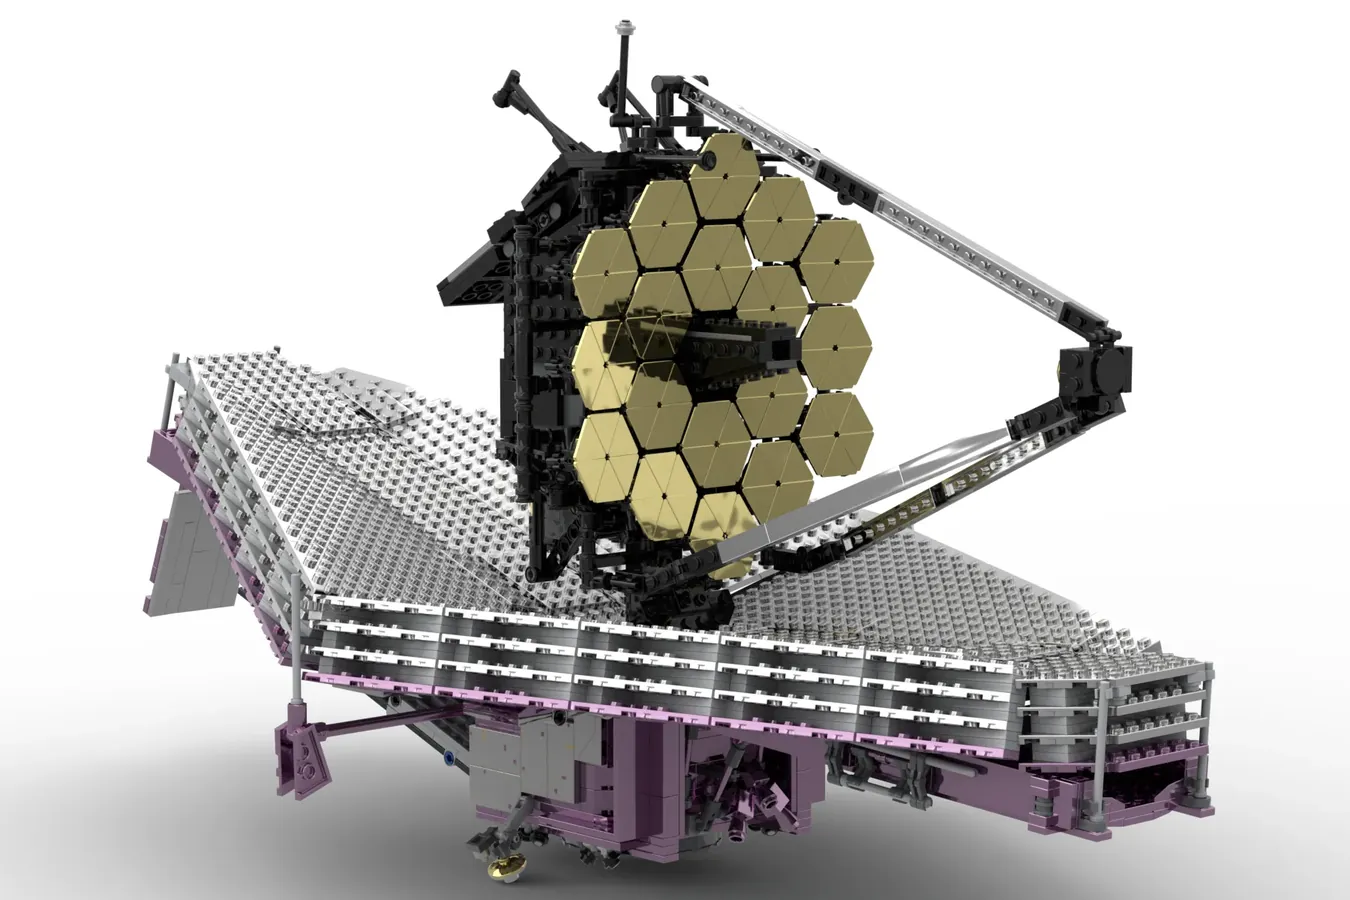 The James Webb Space Telescope with Lego (R) ideas ] has entered the product review!Introducing the 3rd 10,000 support design in 2022